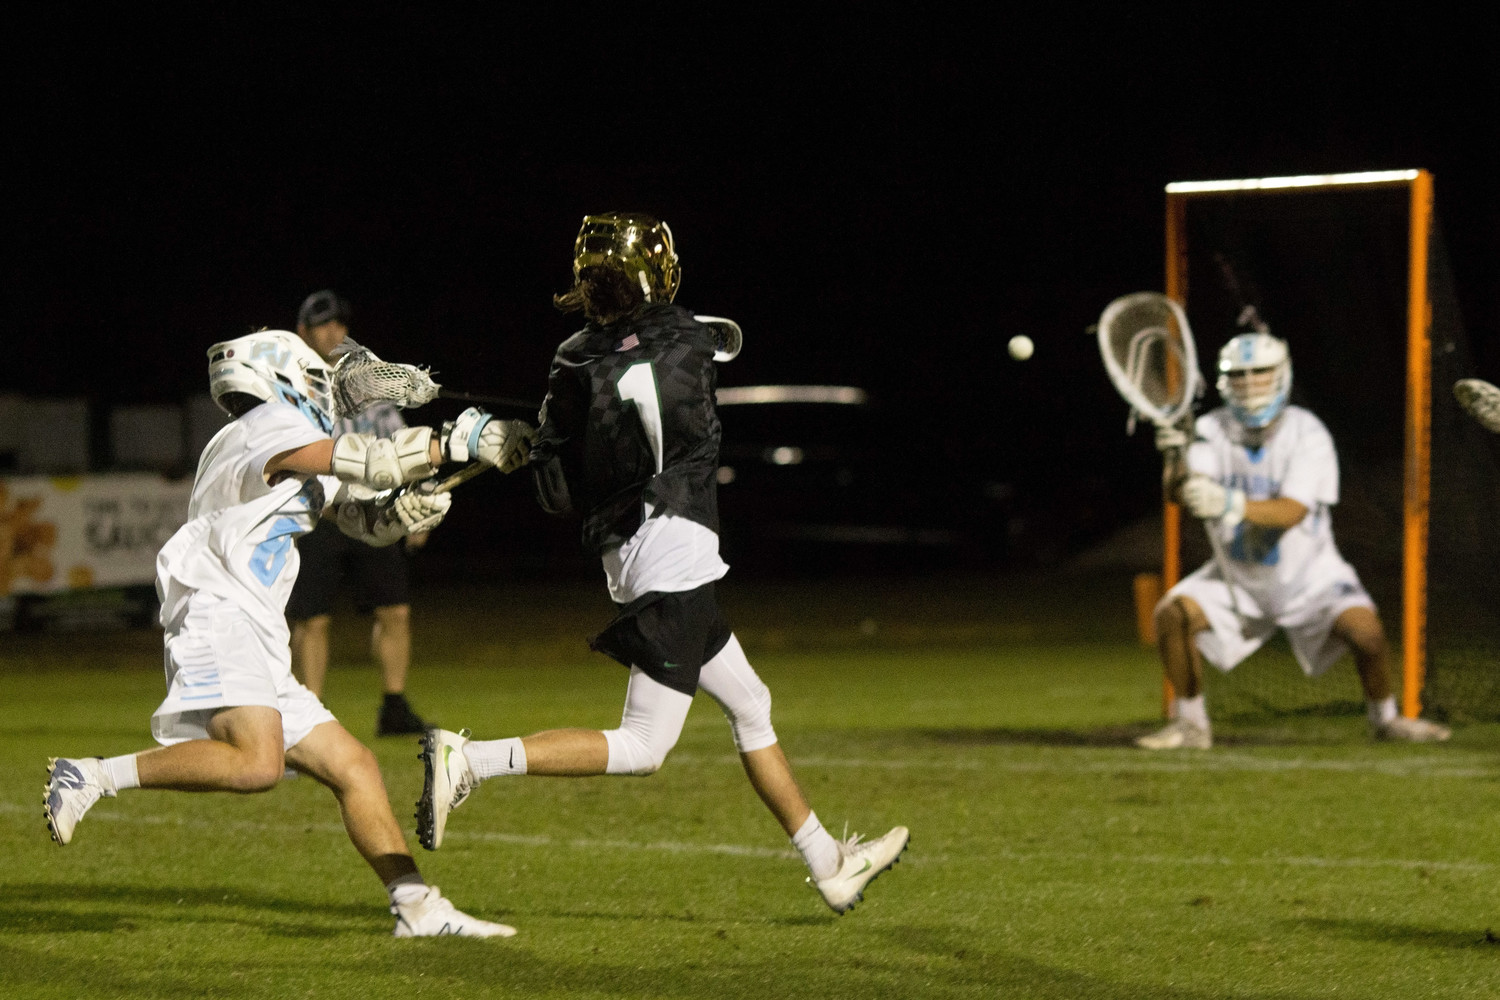 Reilly Mickey of Nease makes a move for the goal.